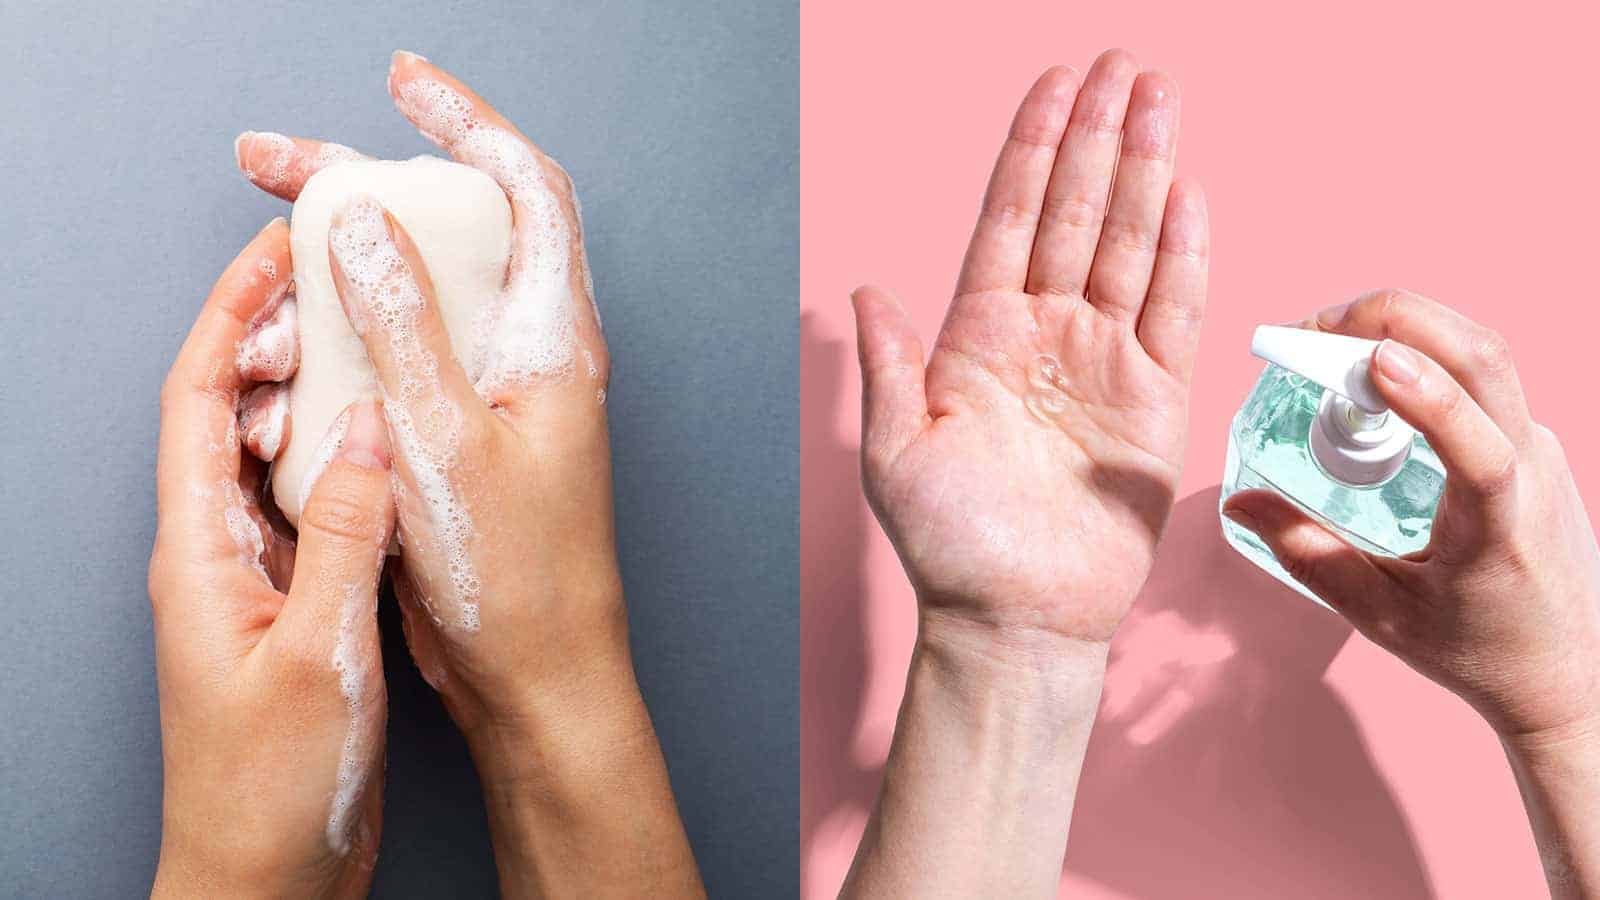 10 Hand Sanitizer Use and Handwashing Tips to Never Ignore